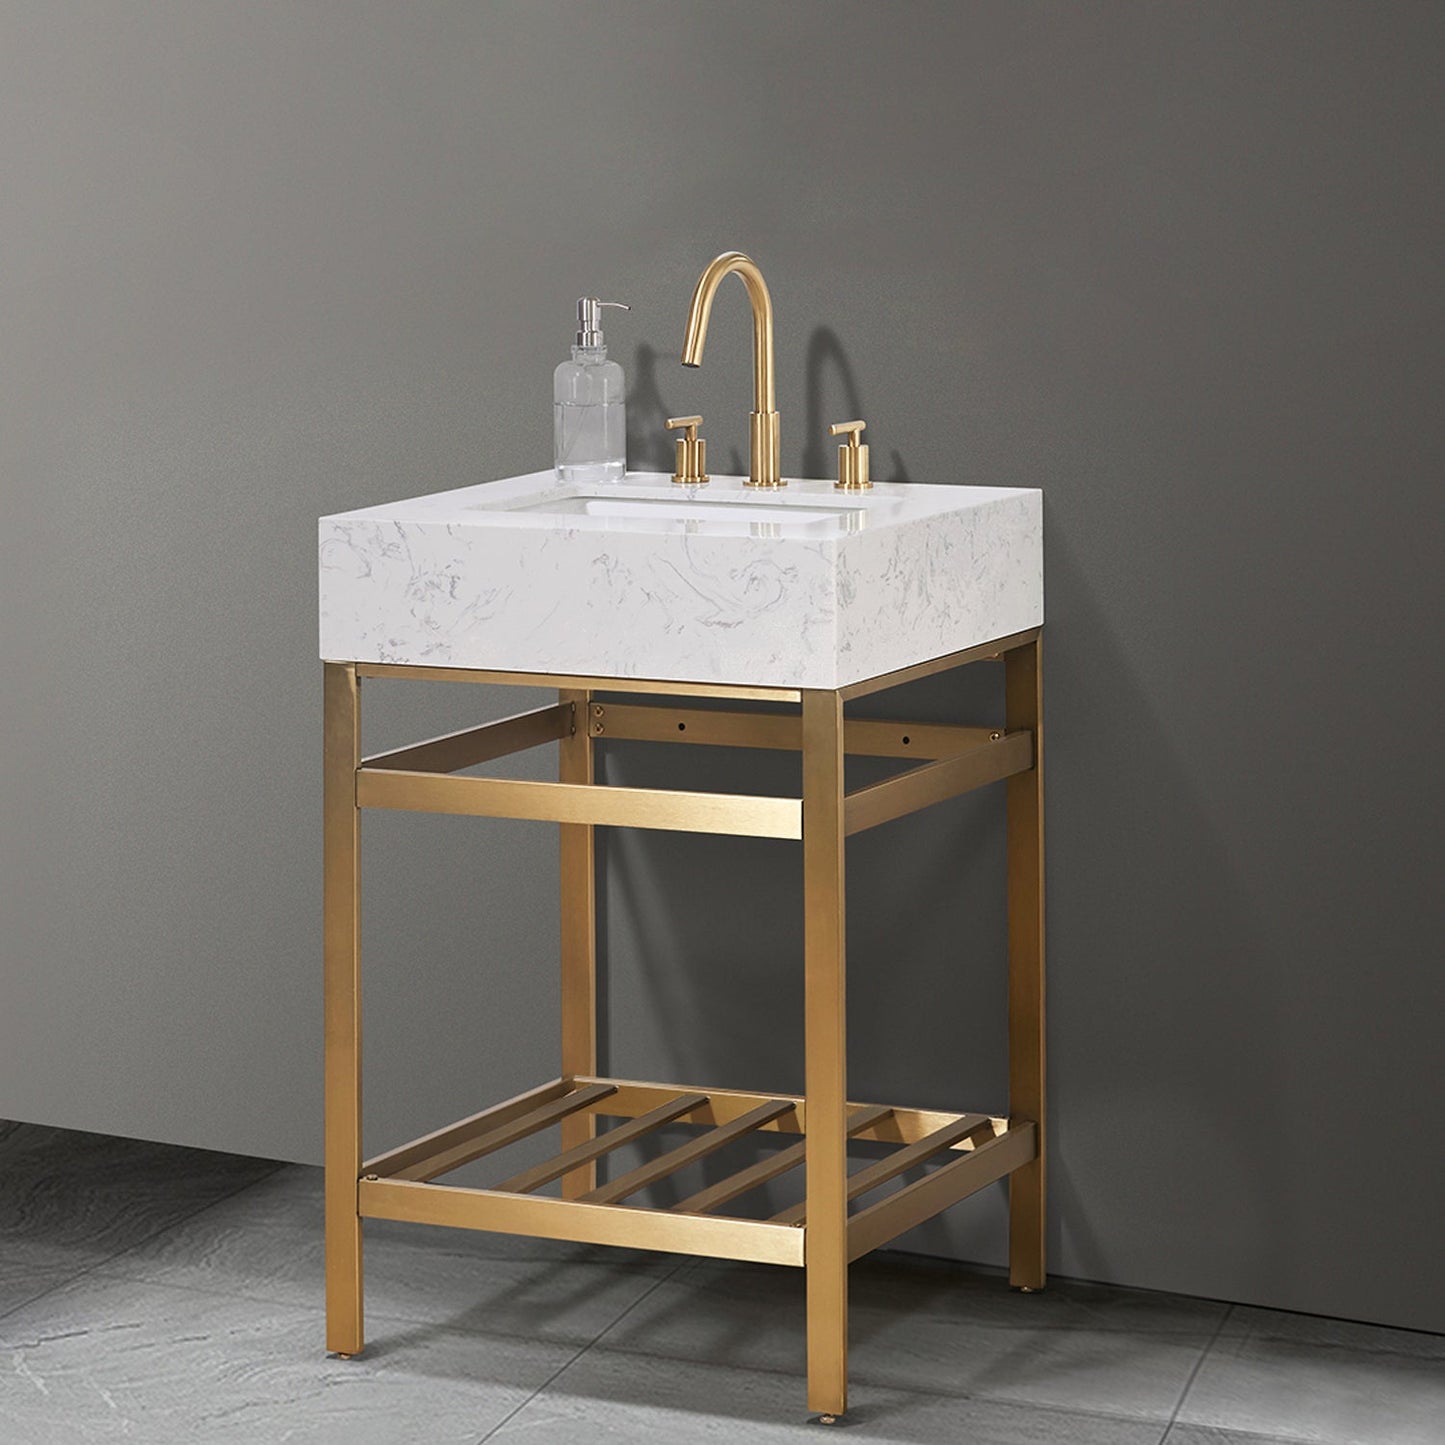 Merano 24" Single Stainless Steel Vanity Console in Brushed Gold with Aosta White Stone Countertop without Mirror